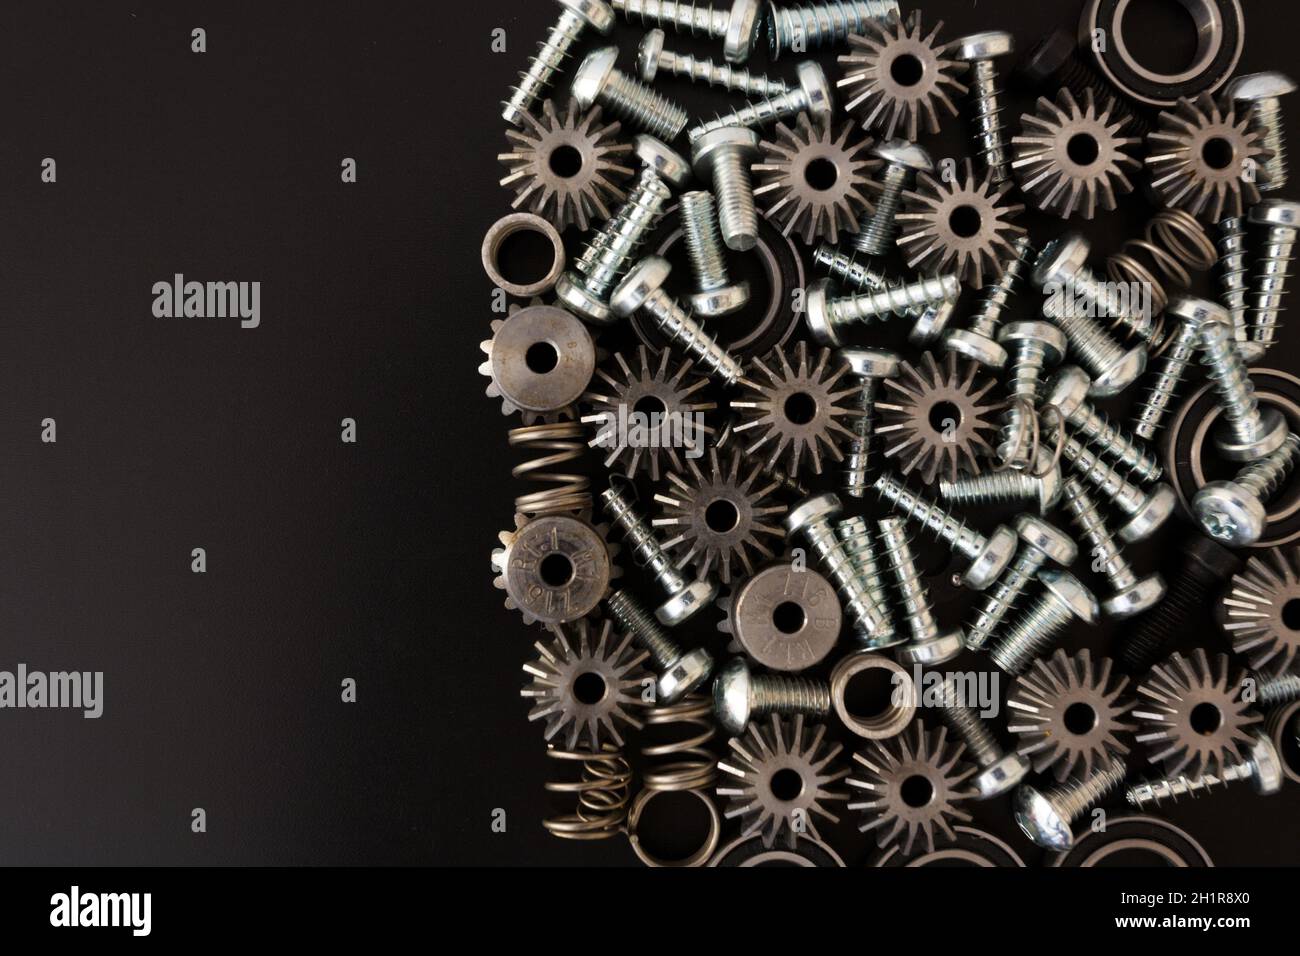 Background with mechanical components, gears, springs, screws, industrial objects Stock Photo